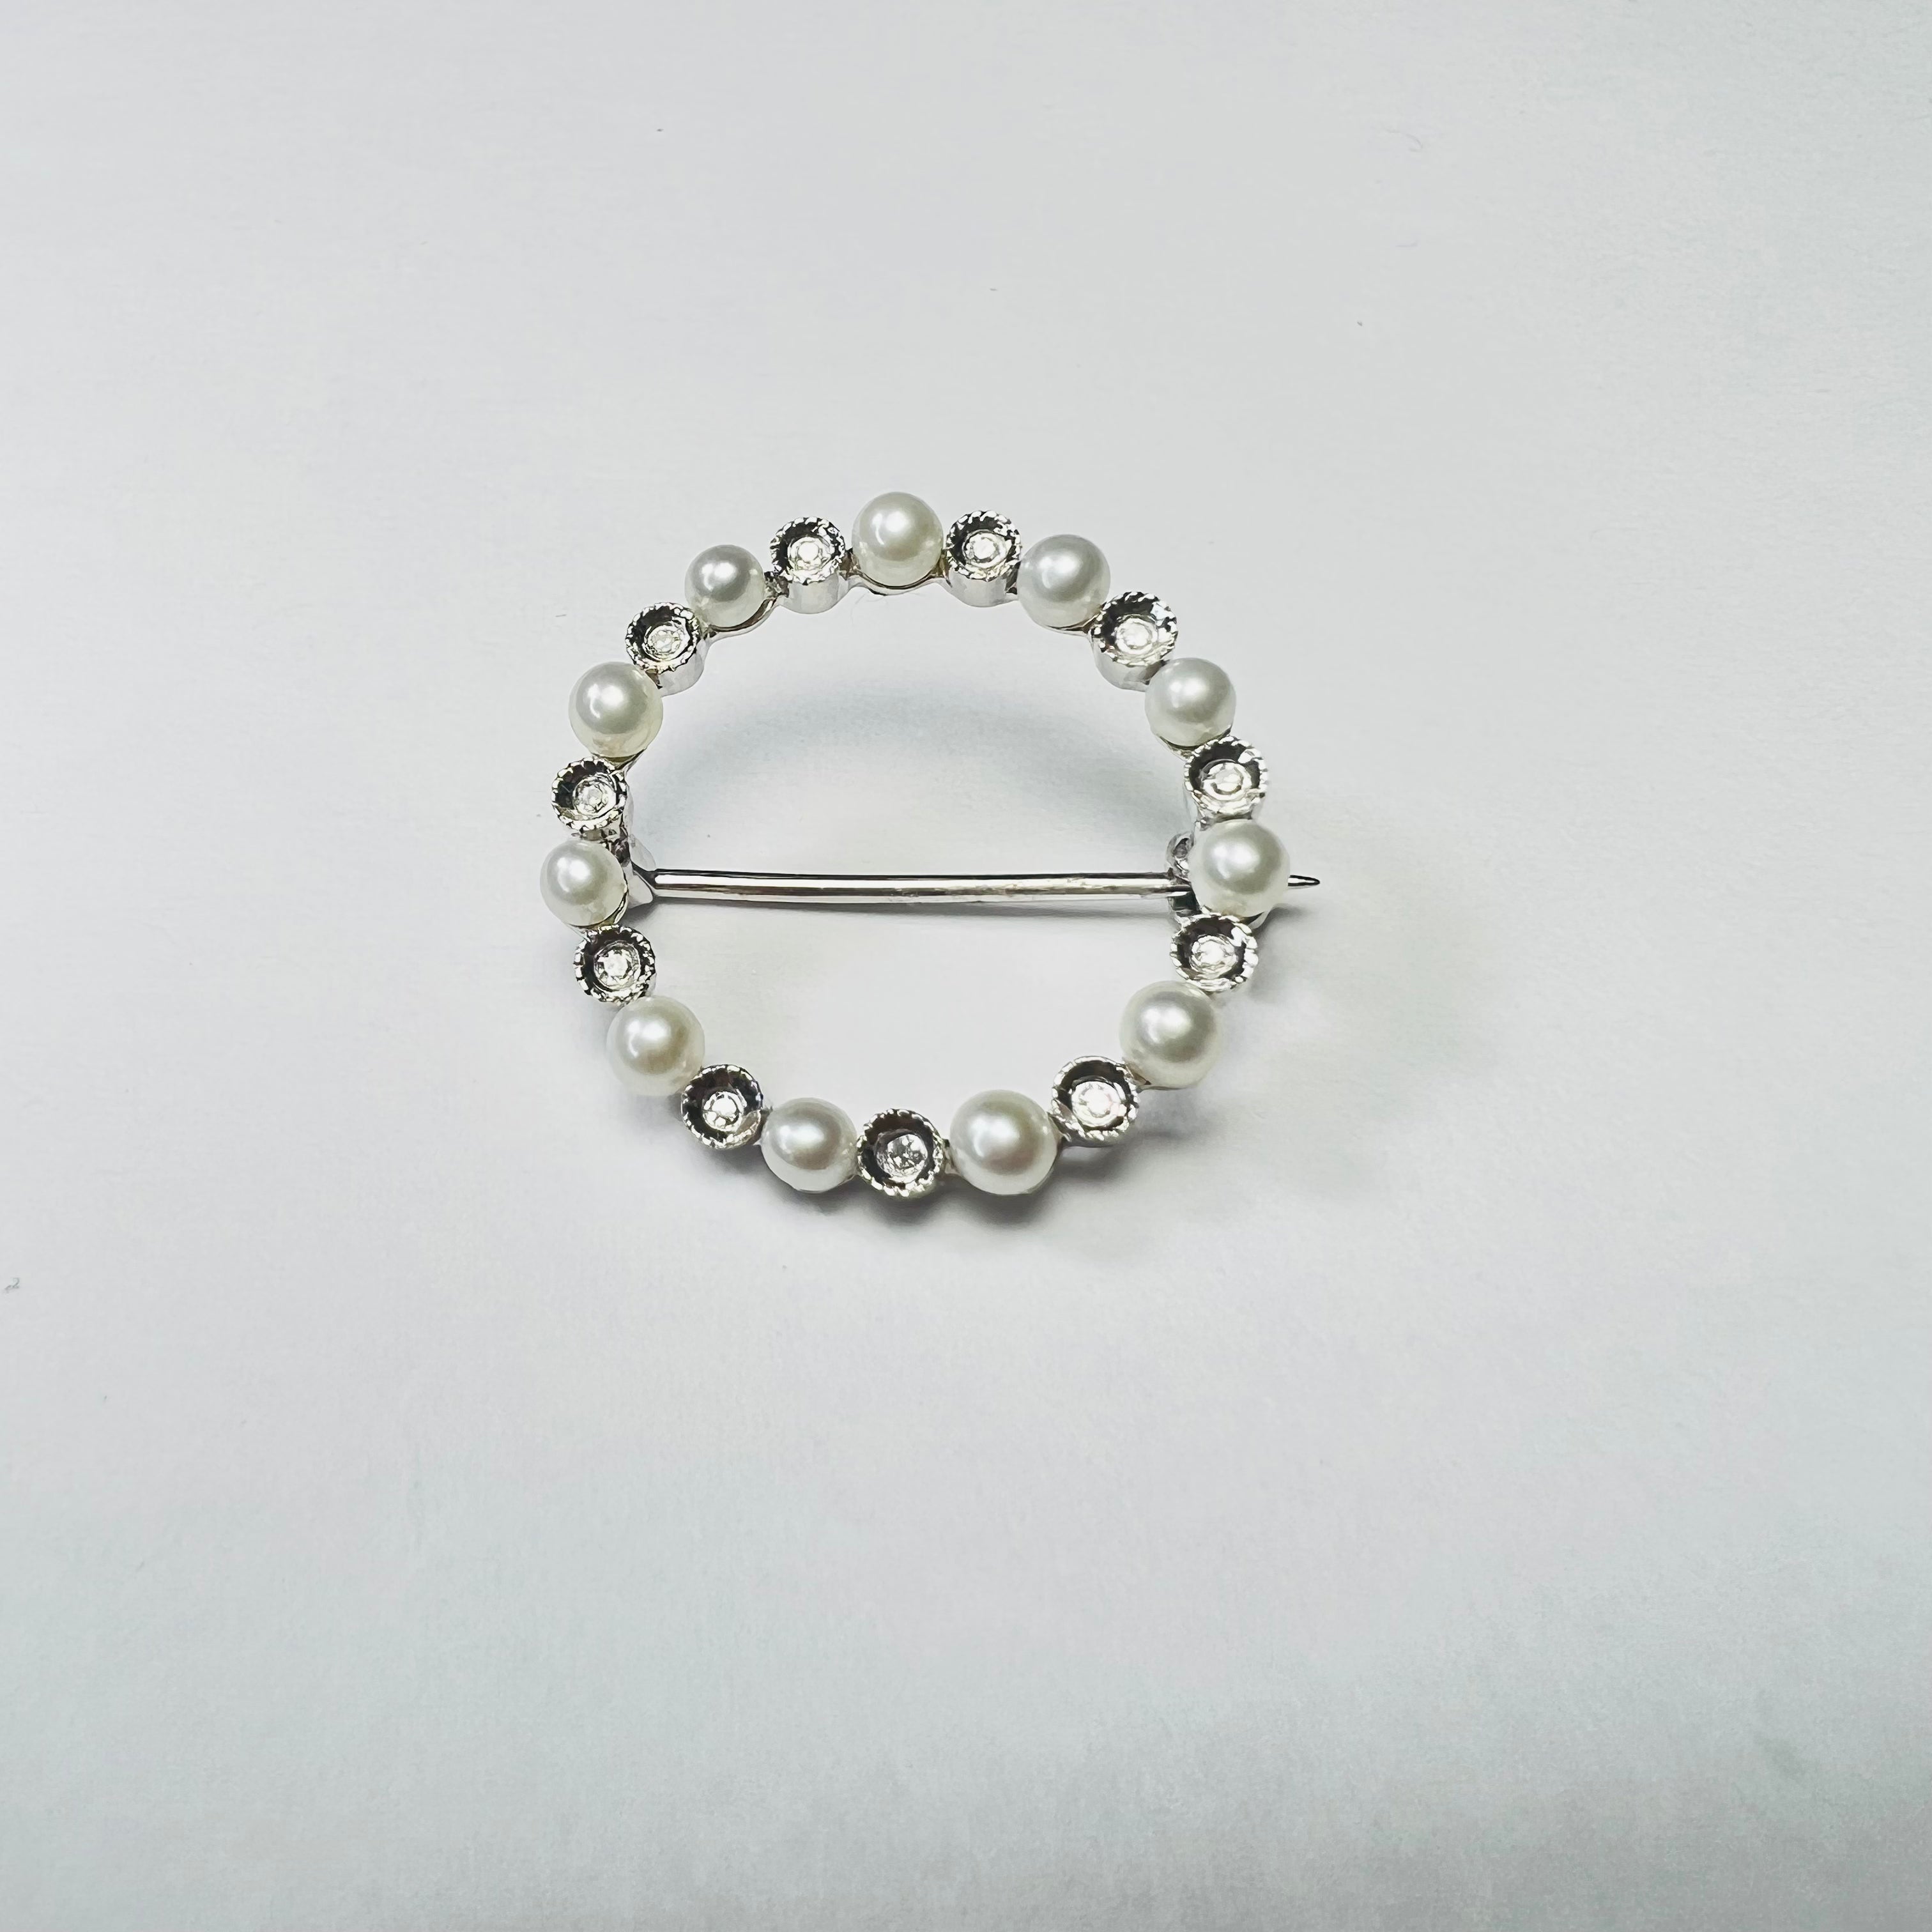 Solid 14K White Gold Pearl & Diamond Round Broach Pin .78"